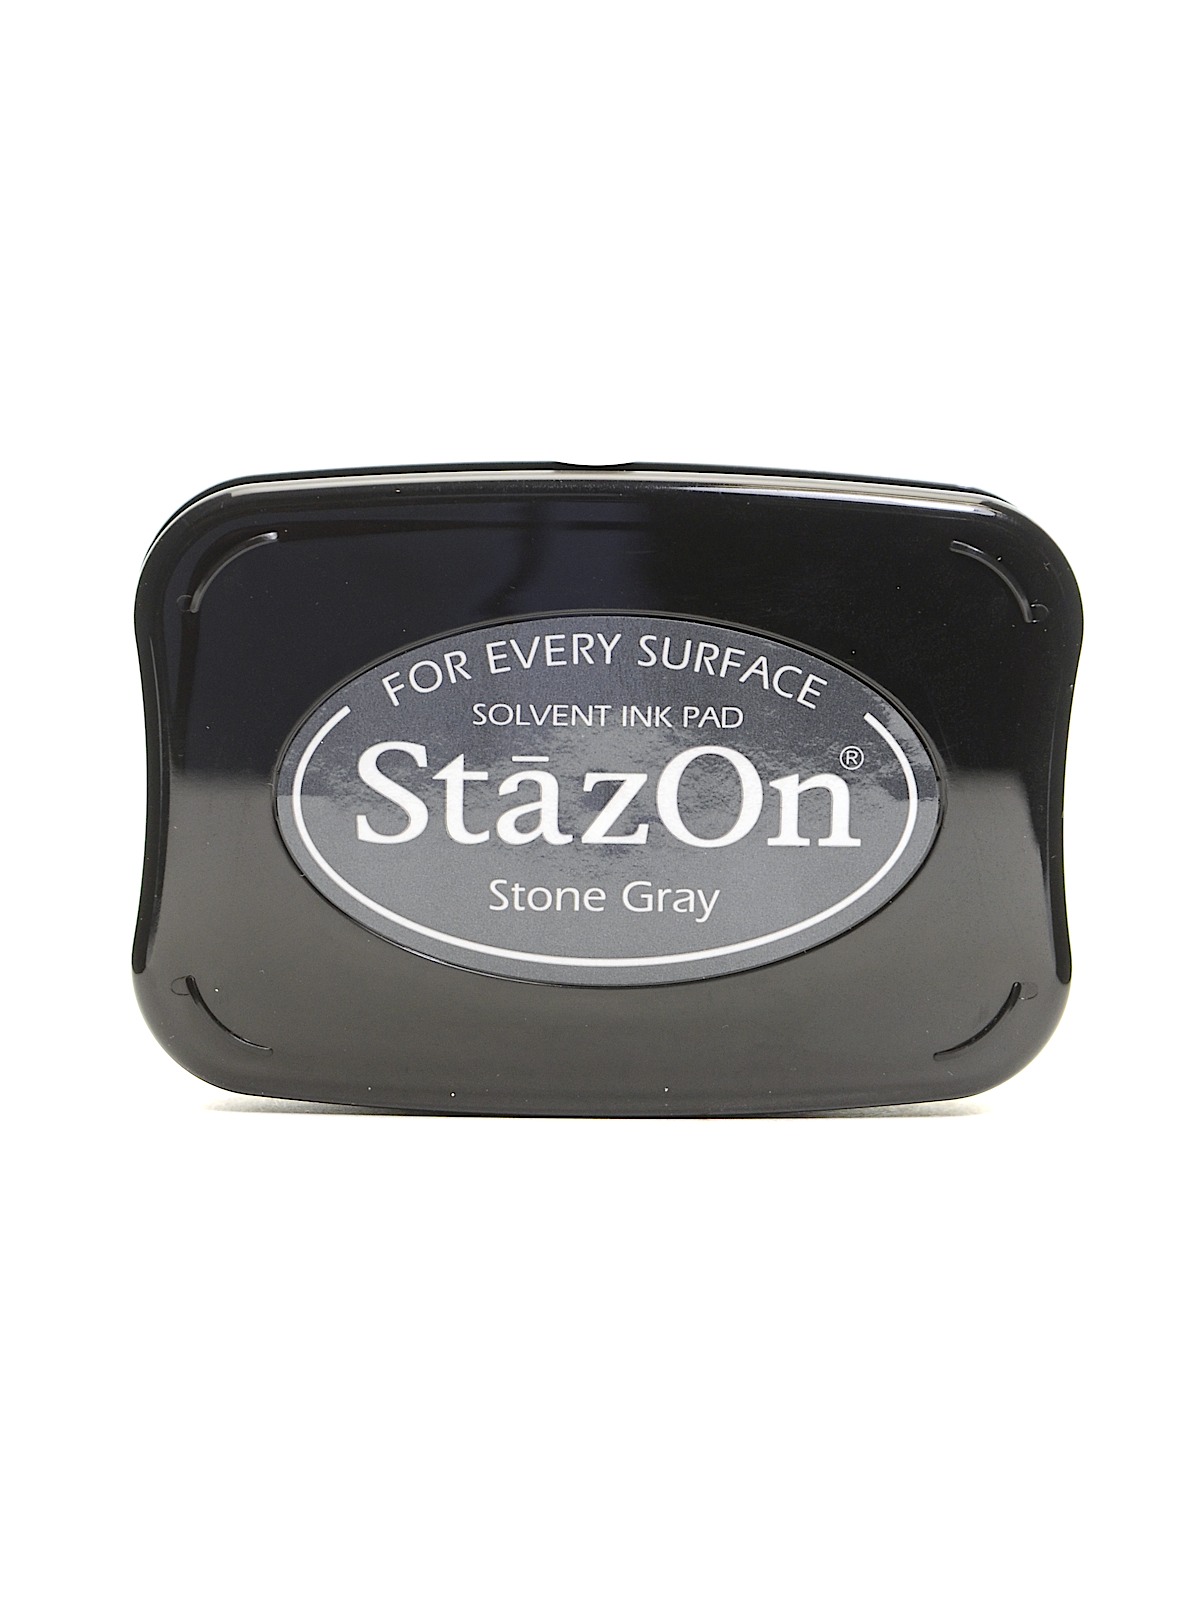 Stazon Solvent Ink Stone Gray 3.75 In. X 2.625 In. Full-size Pad